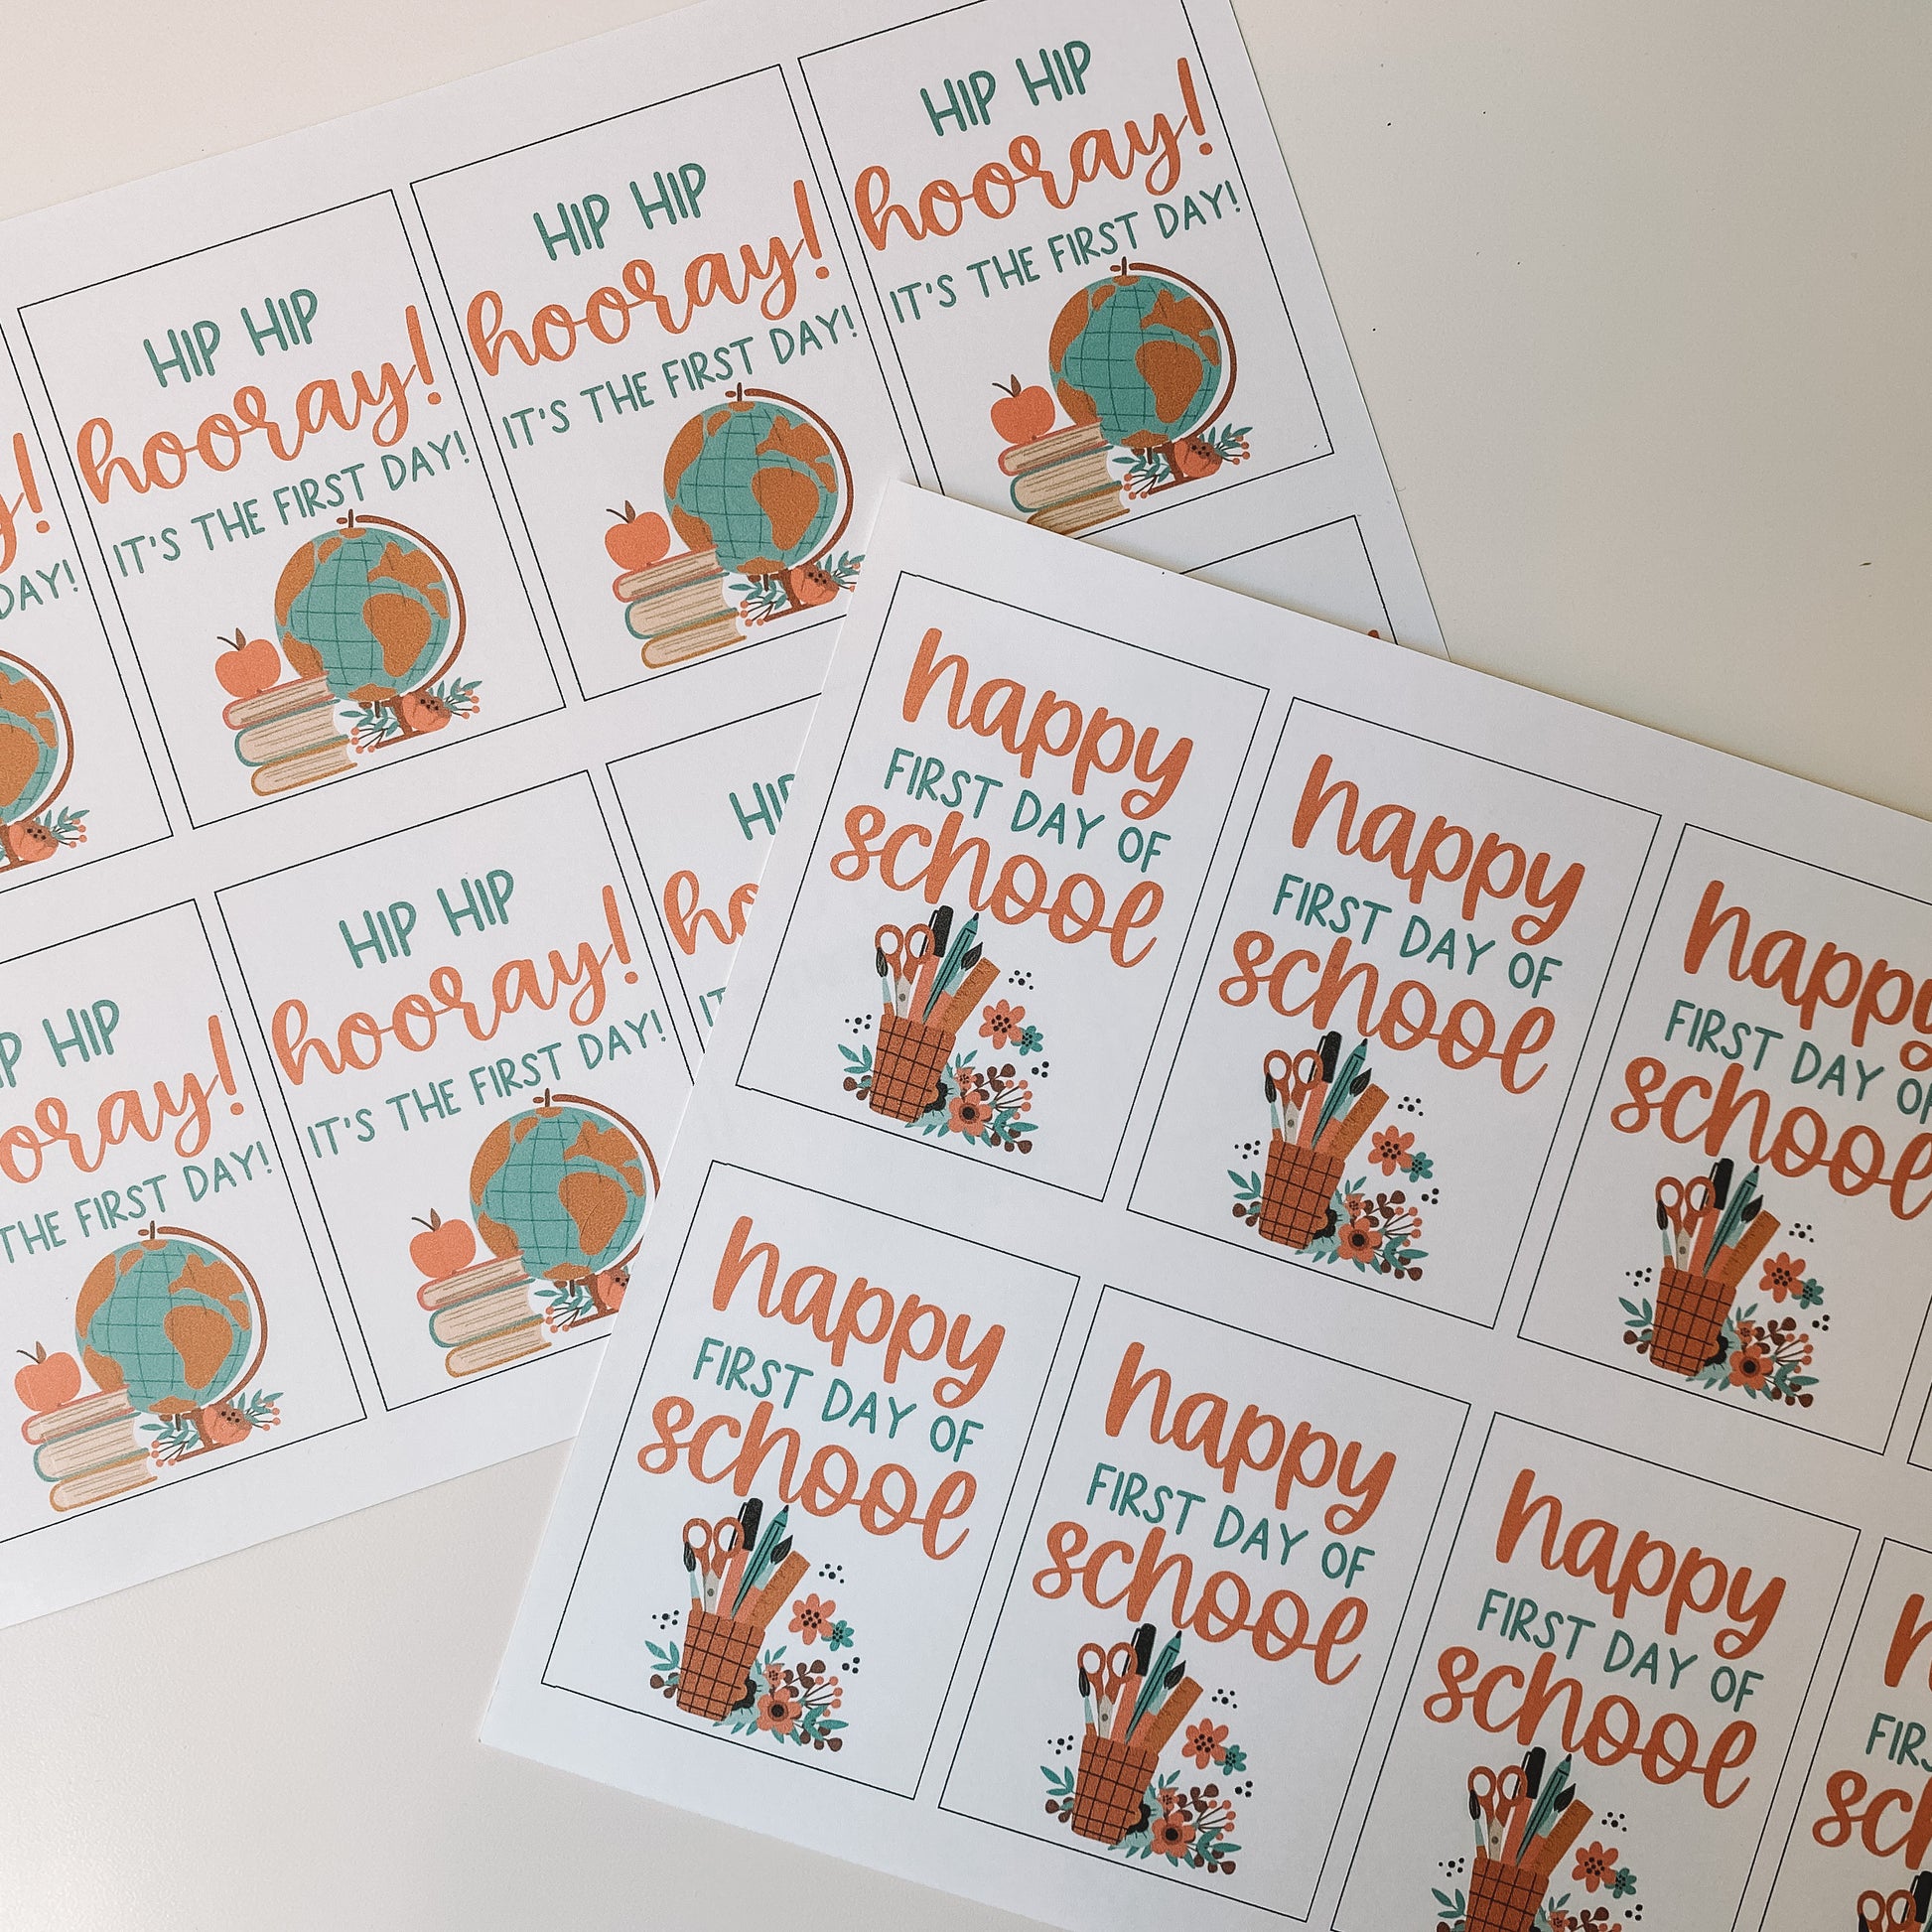 Hip hip hooray it is the first day and happy first day of school gift tags displayed on an 8.5 by 11 inch paper before cutting. There are eight of each tag printed on each page.